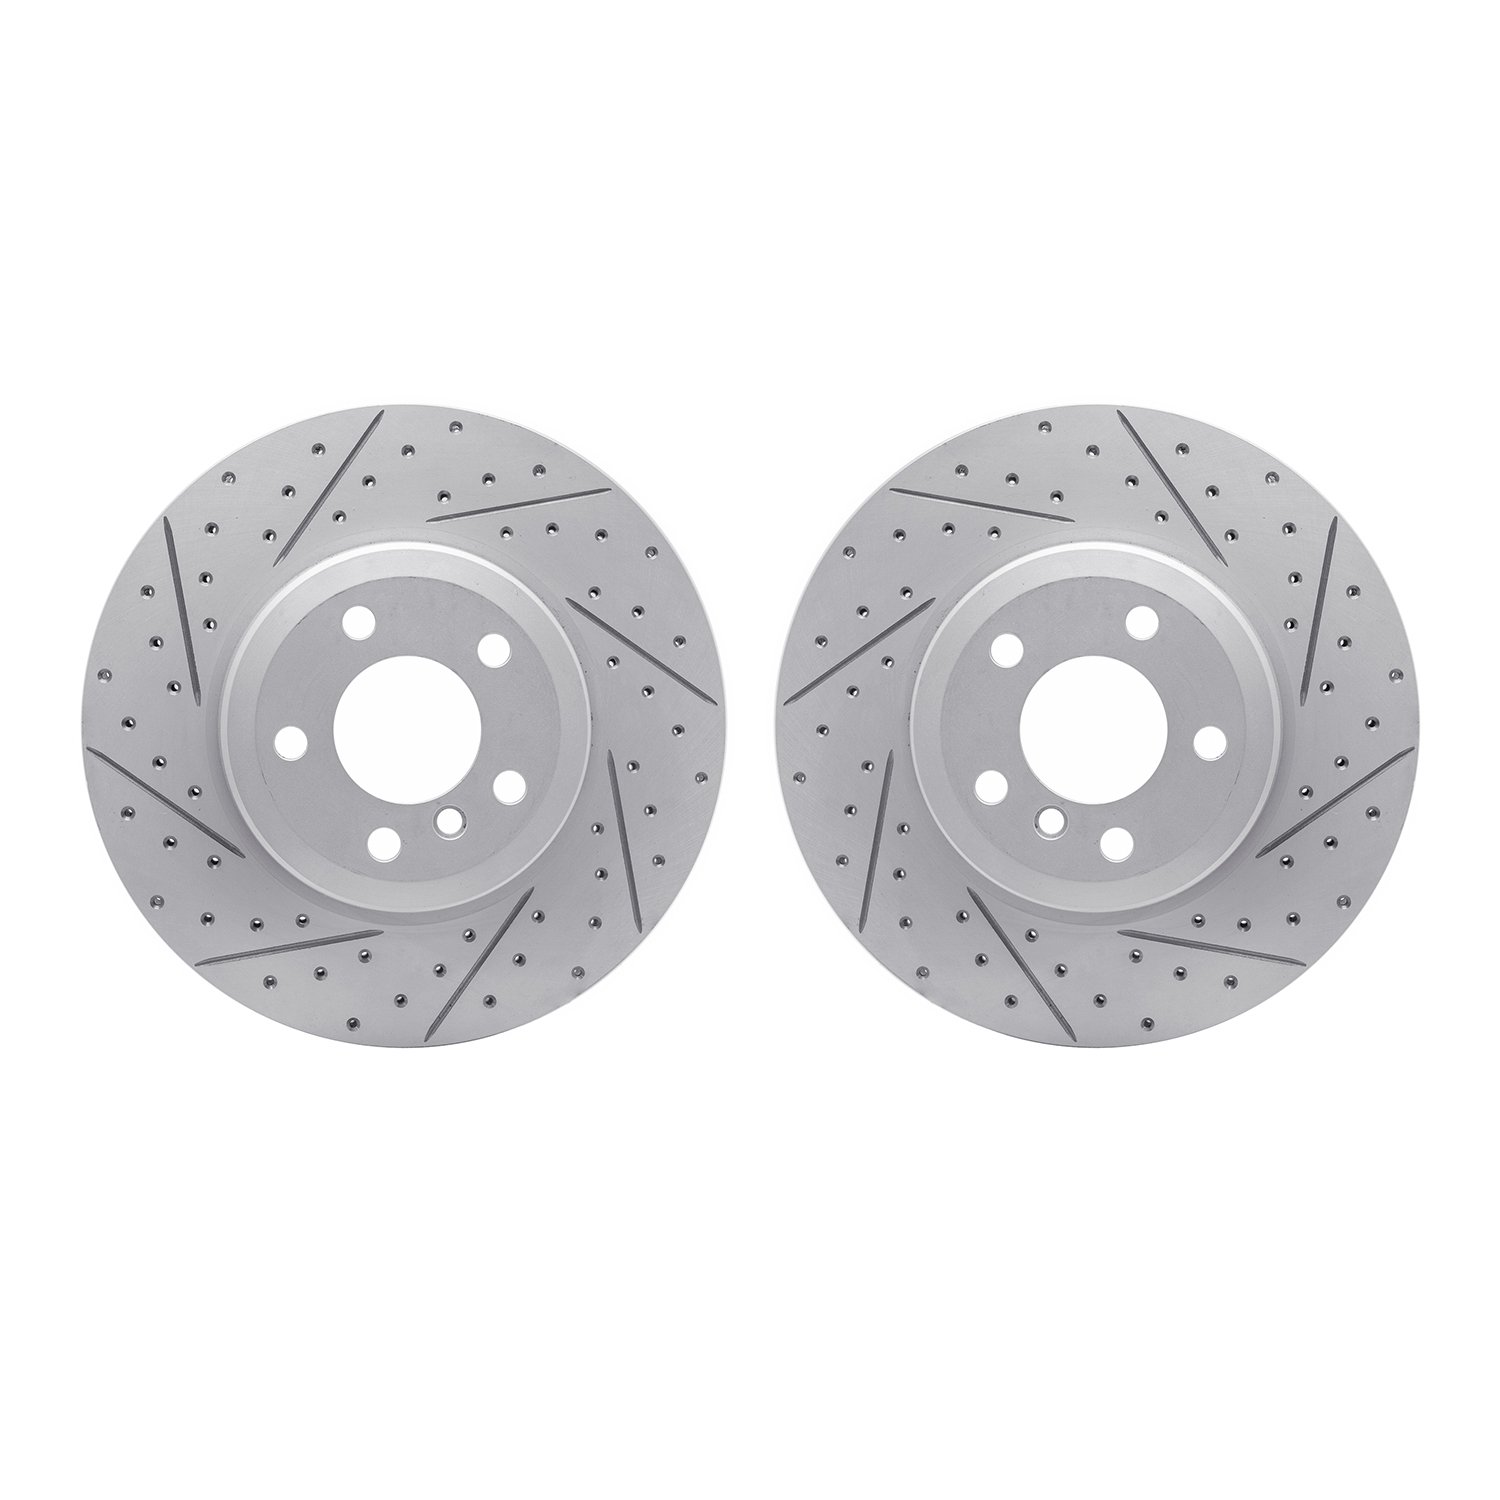 2002-31095 Geoperformance Drilled/Slotted Brake Rotors, 2007-2019 BMW, Position: Rear